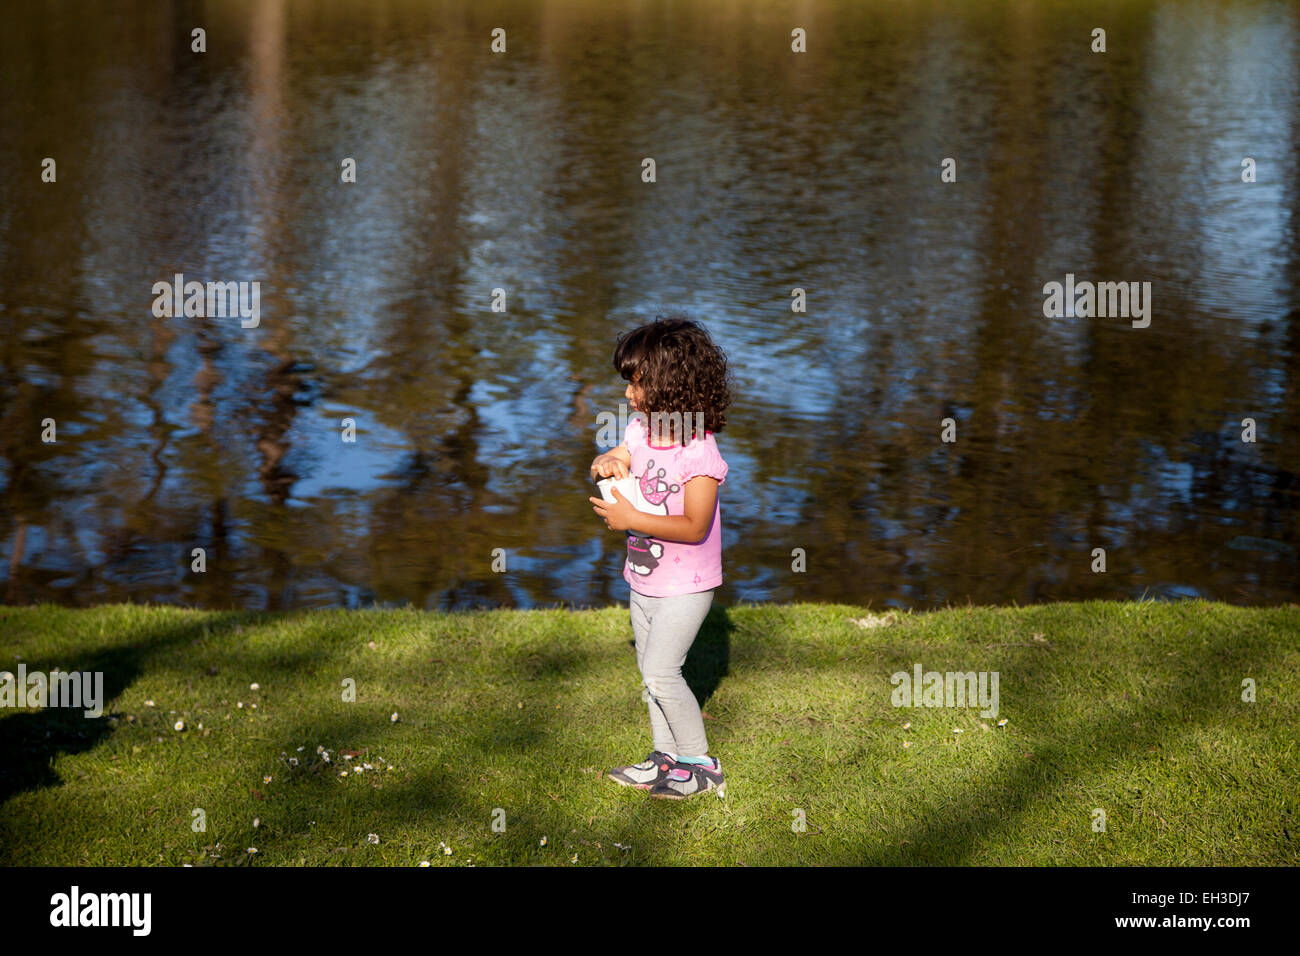 Little girl playing by the pond, Novato, California, USA Stock Photo